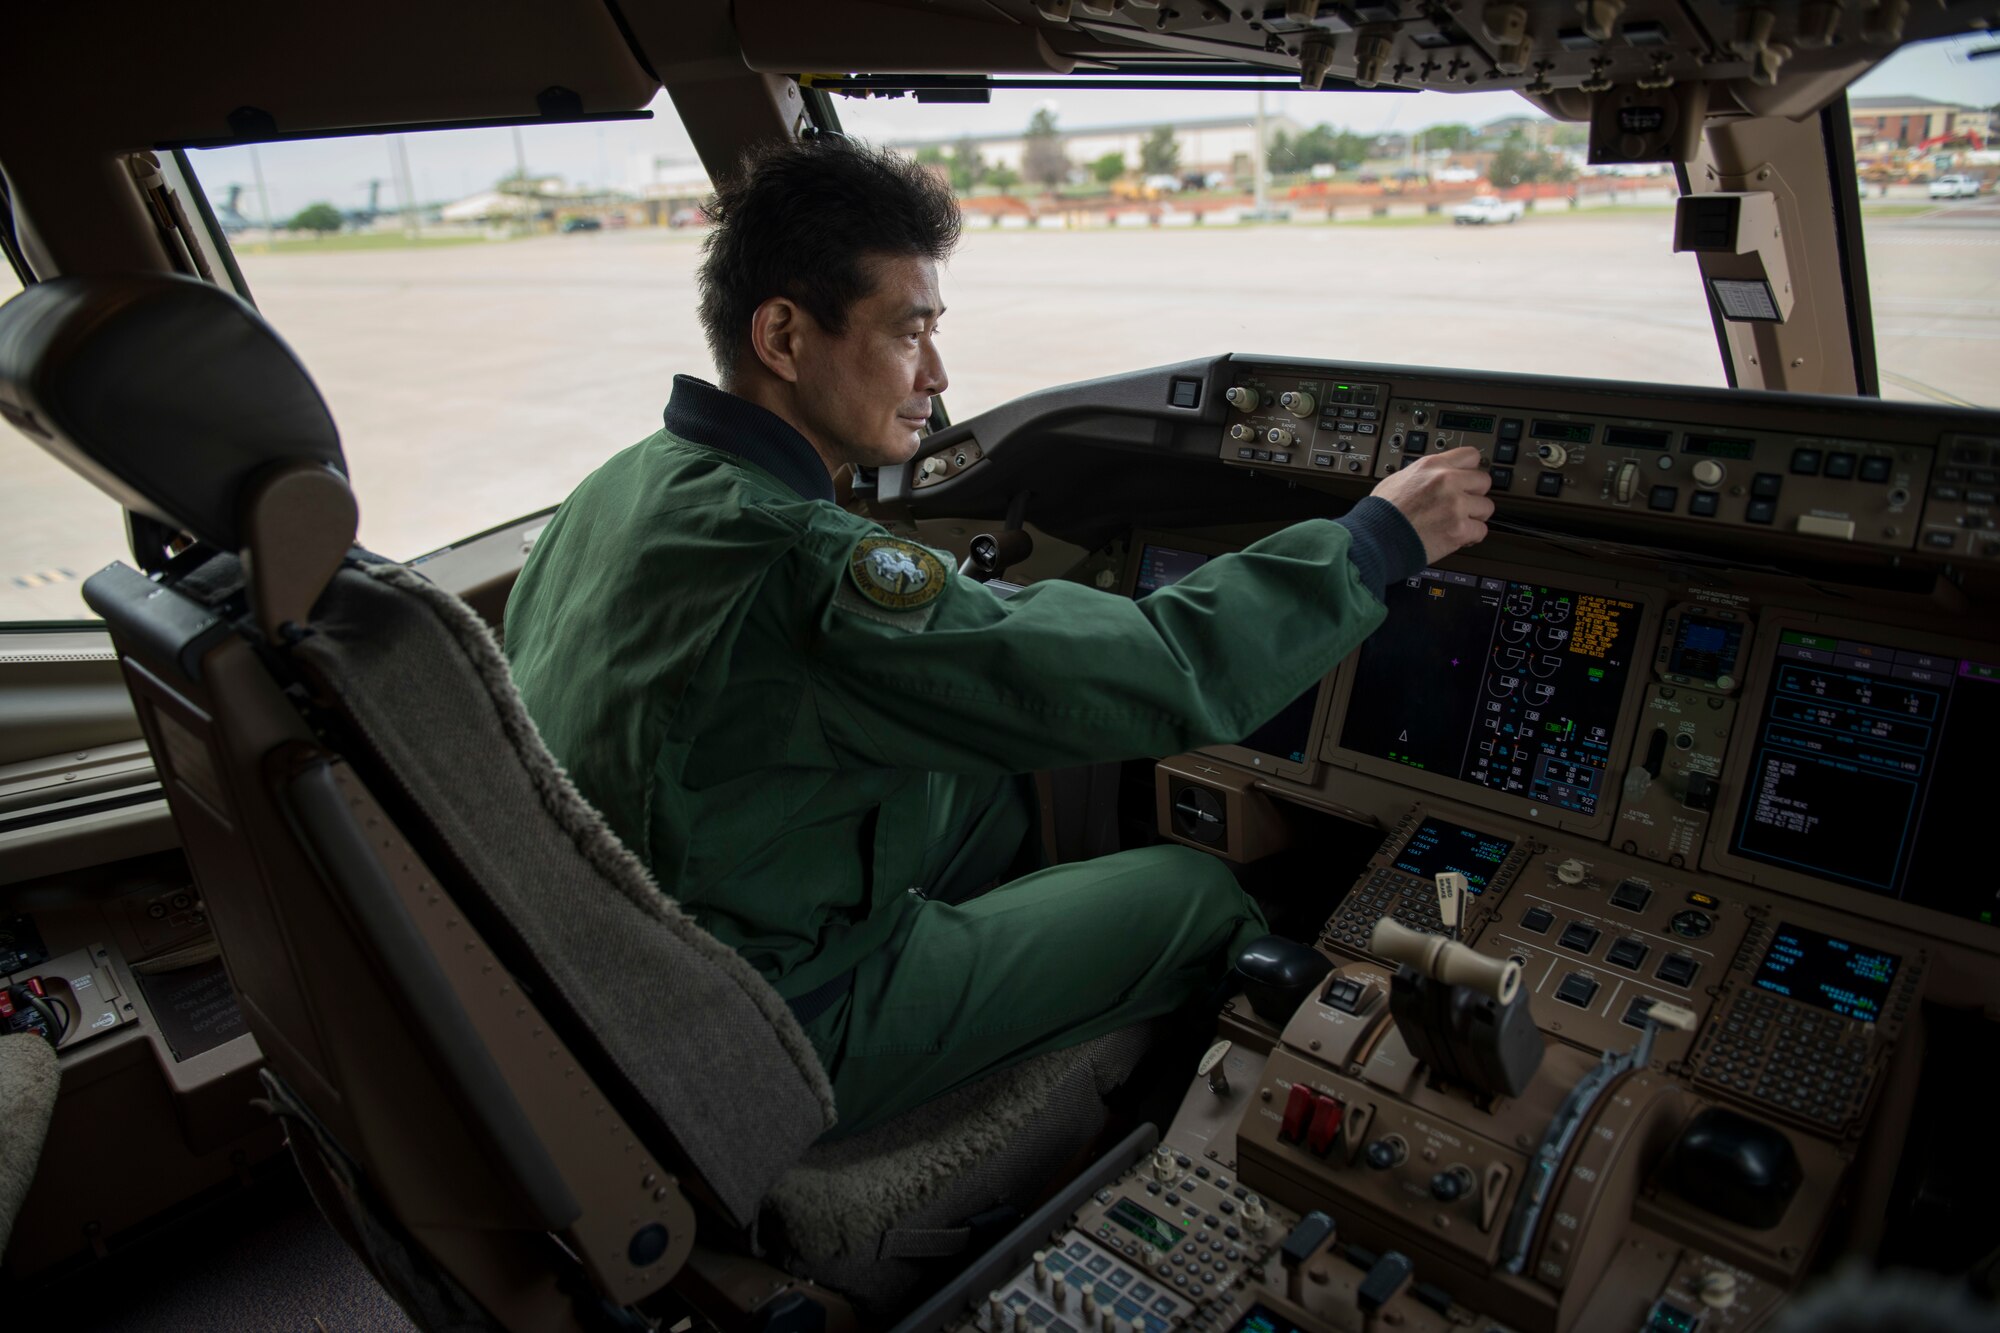 Japan Air Self-Defense Force Lt. Col. Tetsuji Kamiguchi, 405th Air Refueling Squadron commander, sits in the cockpit of a KC-46 Pegasus, May 12, 2021, at Altus Air Force Base, Oklahoma. The KC-46 has the capability to carry more than 212,000 pounds of fuel. (U.S. Air Force photo by Airman 1st Class Amanda Lovelace)